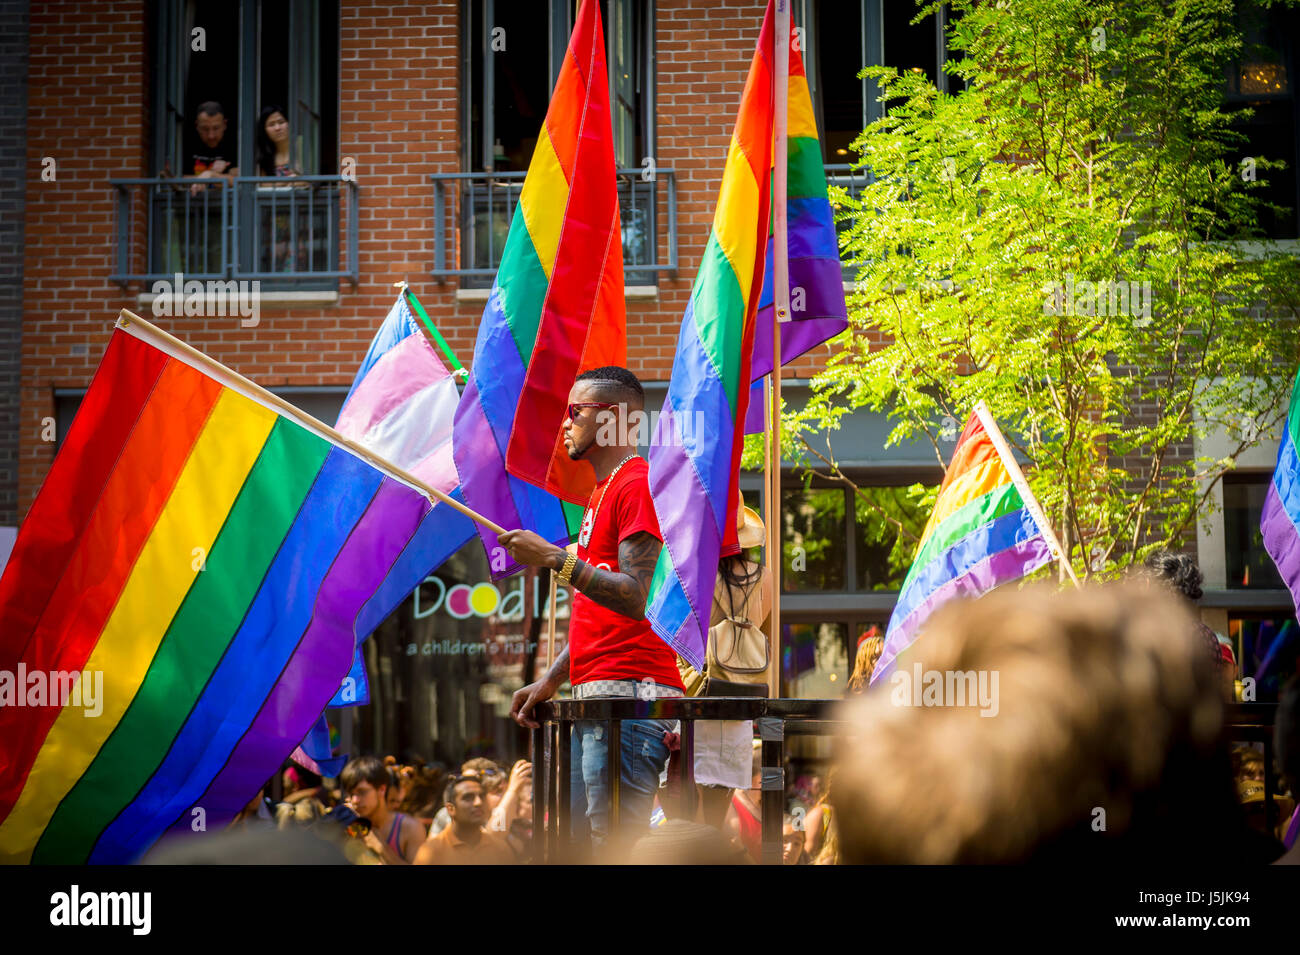 NEW YORK CITY - JUNE 26, 2015: Supporters wave rainbows flags on the sidelines of the annual Pride Parade as it passes through Greenwich Village. Stock Photo